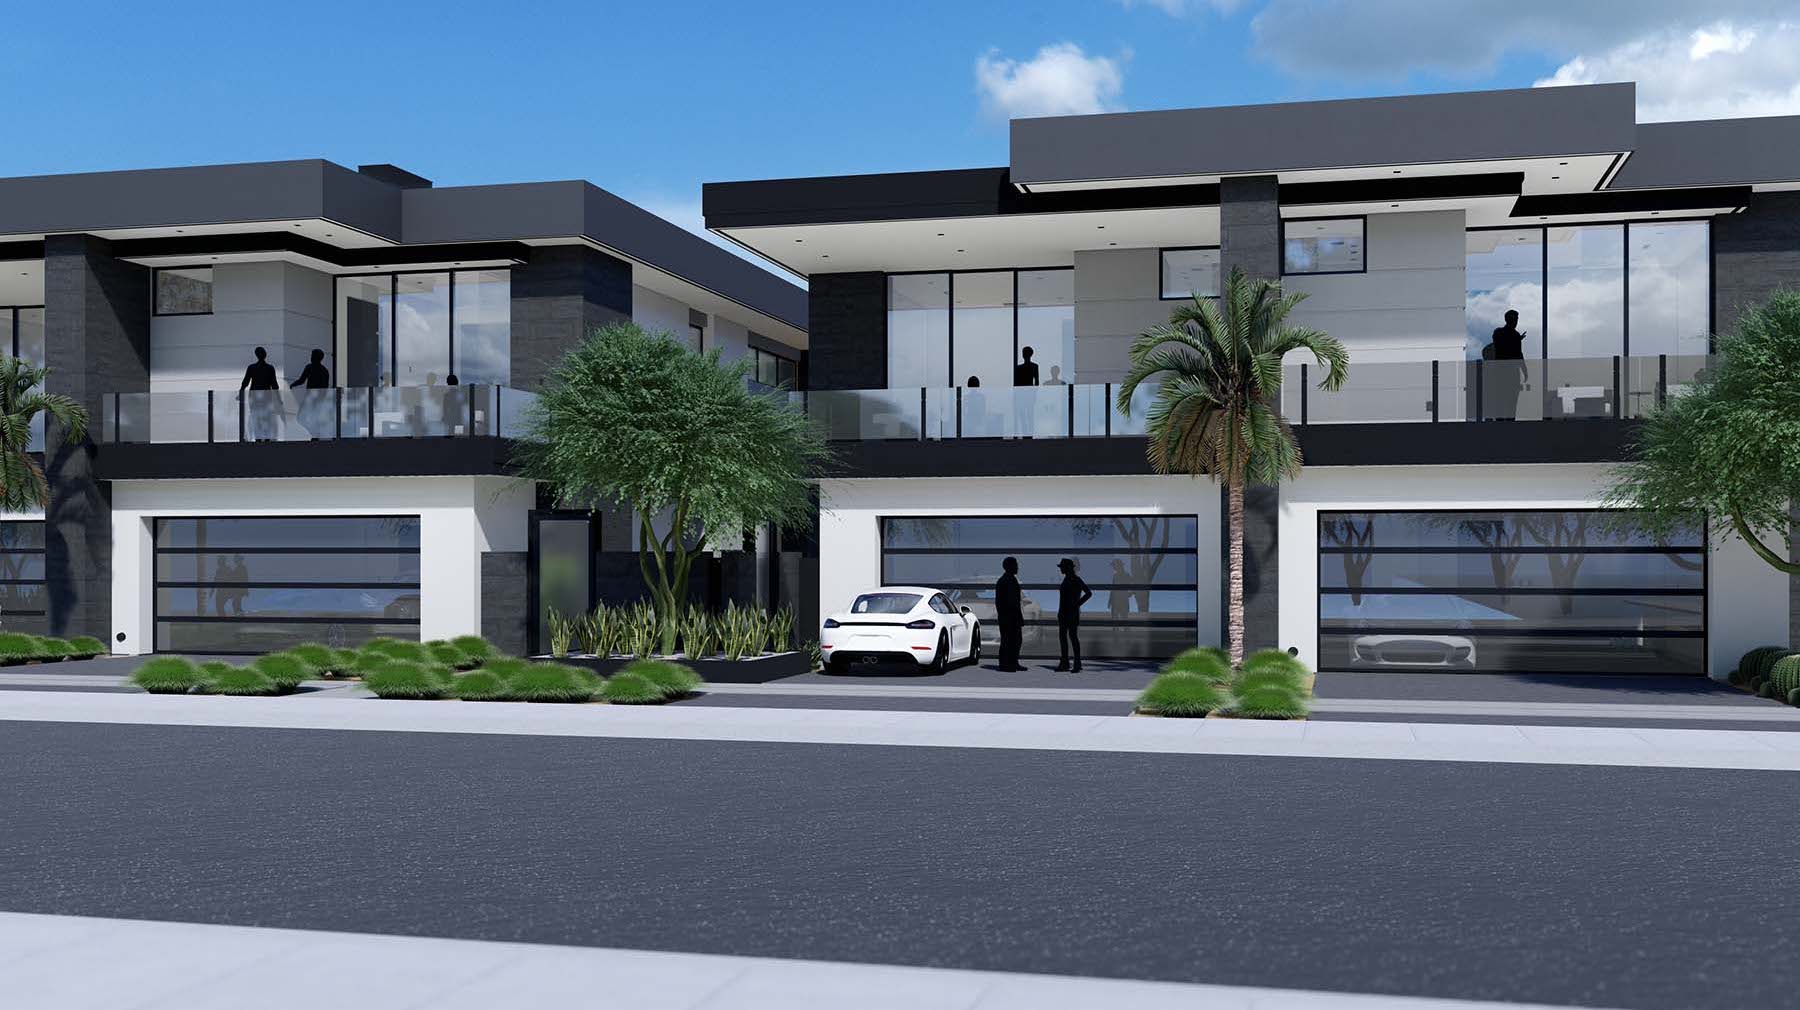 Paloma townhomes– Front view